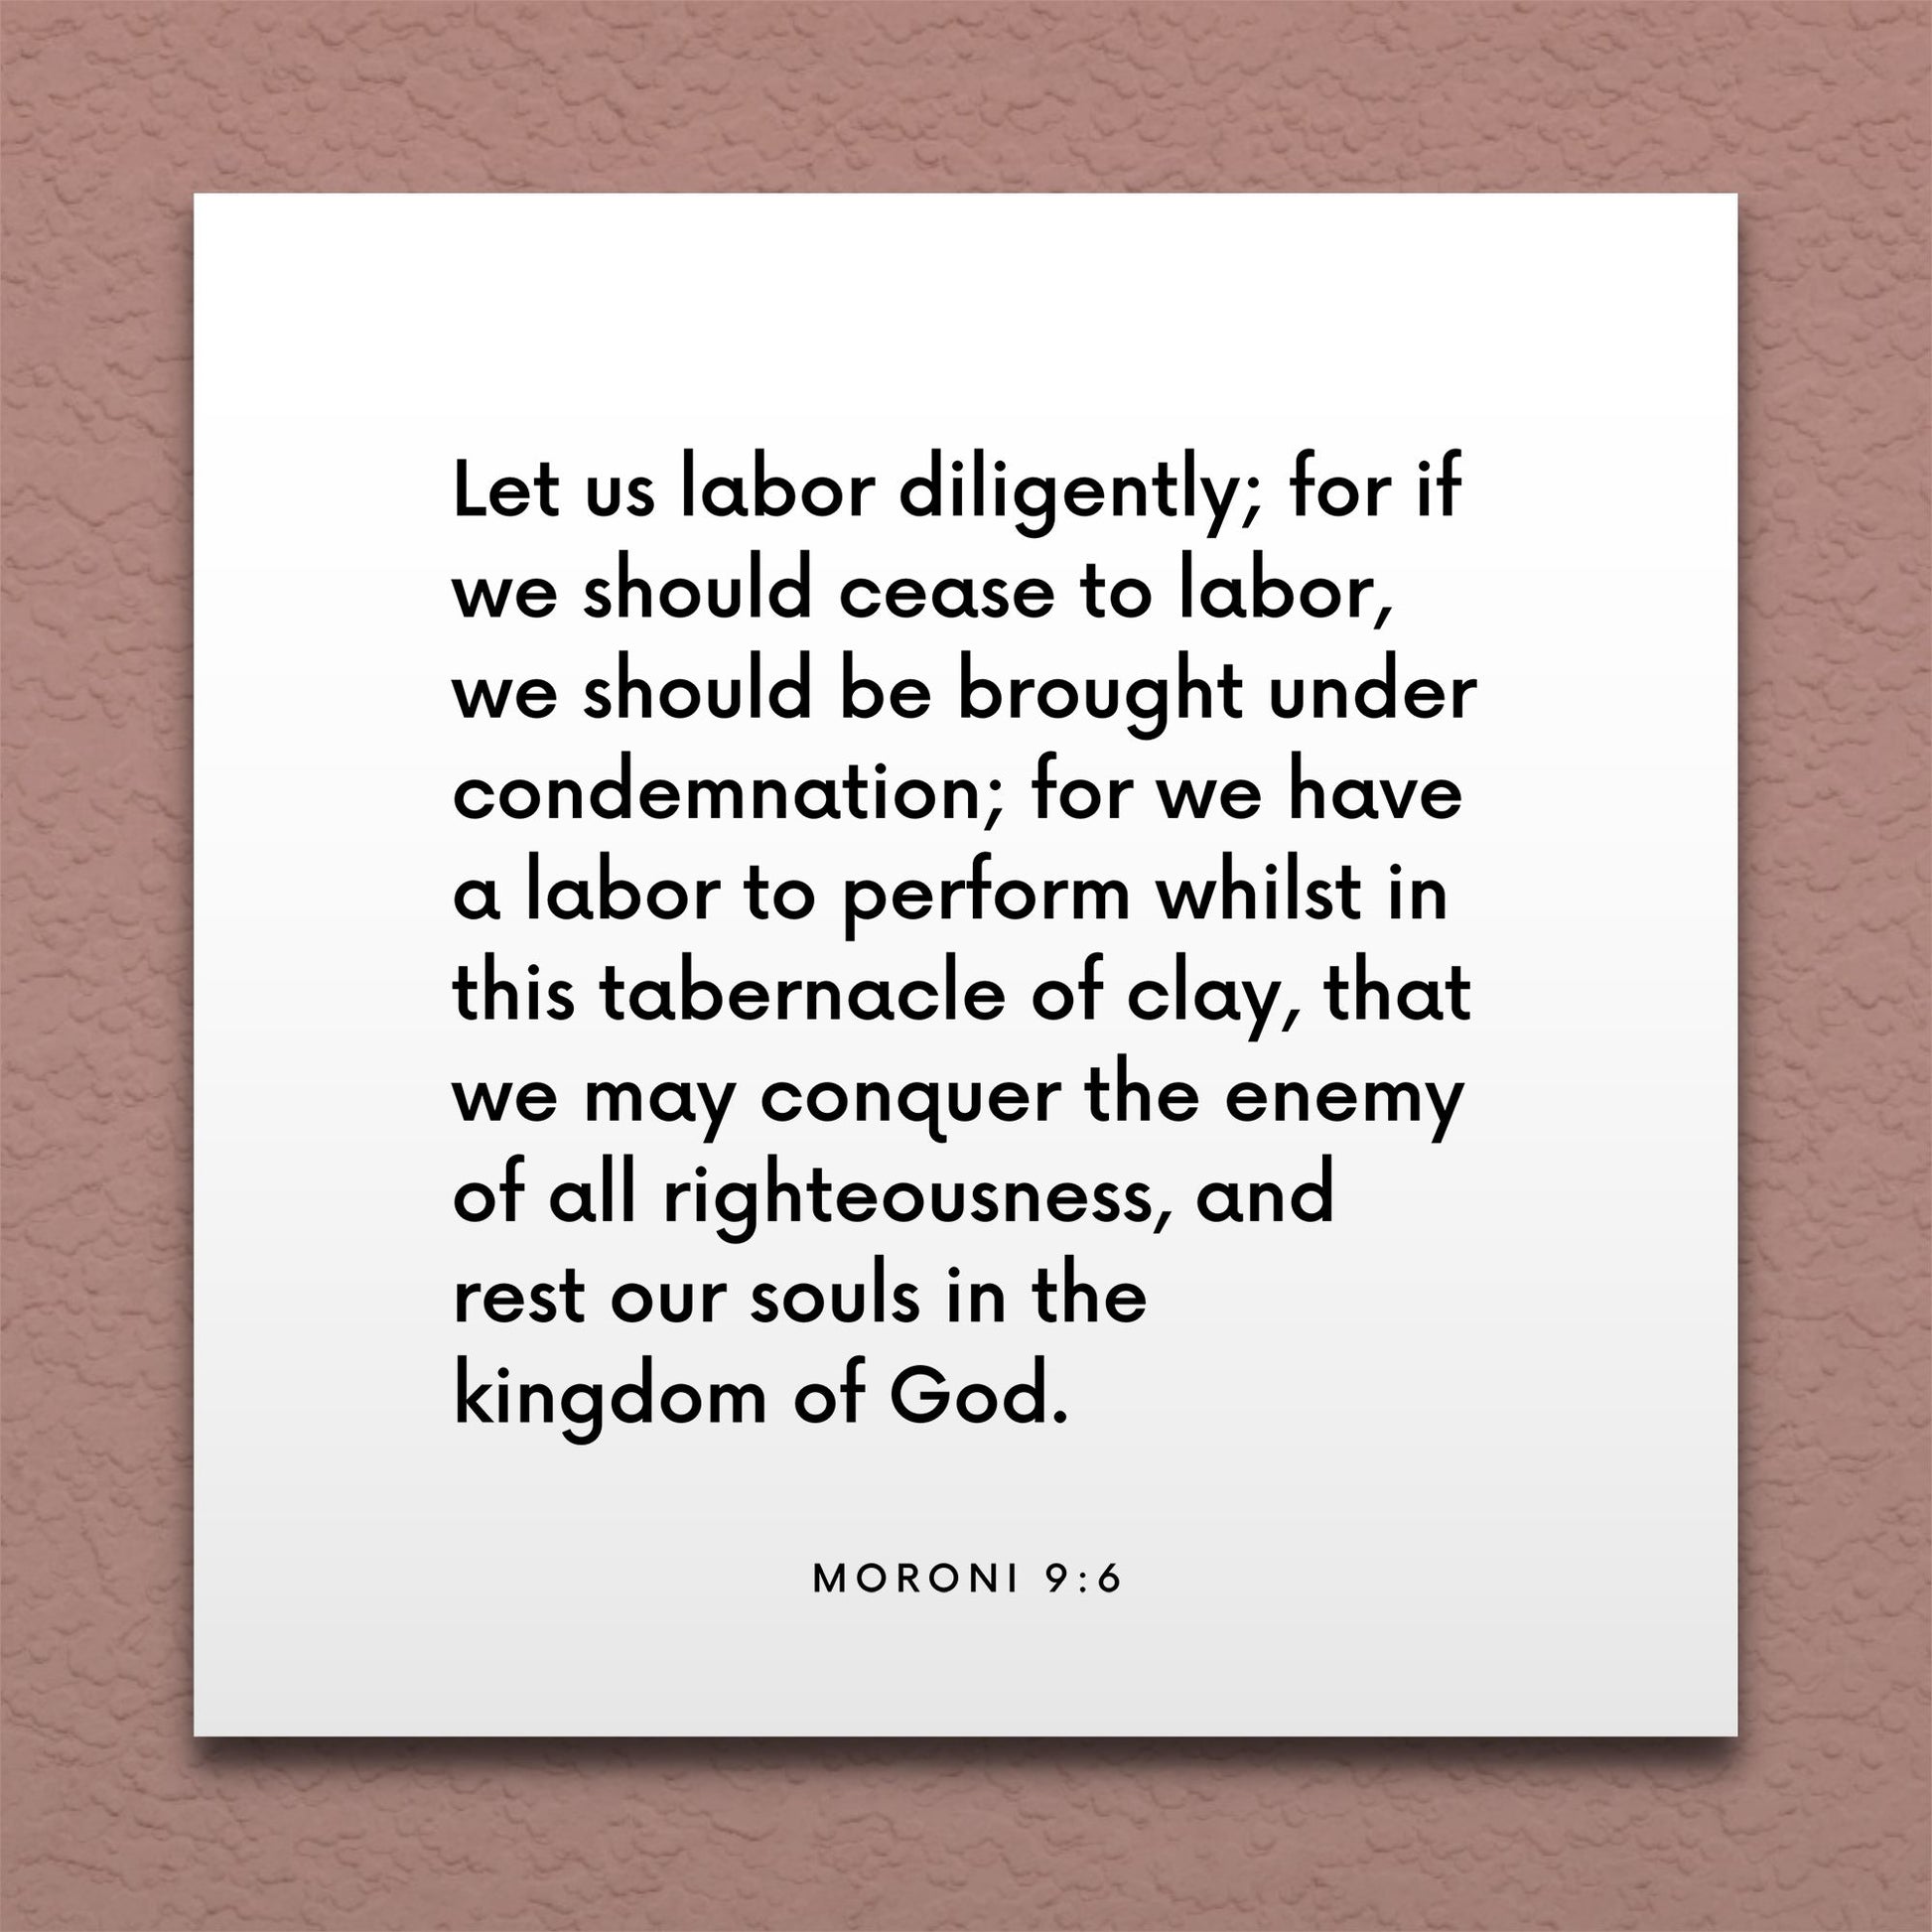 Wall-mounted scripture tile for Moroni 9:6 - "We have a labor to perform whilst in this tabernacle of clay"